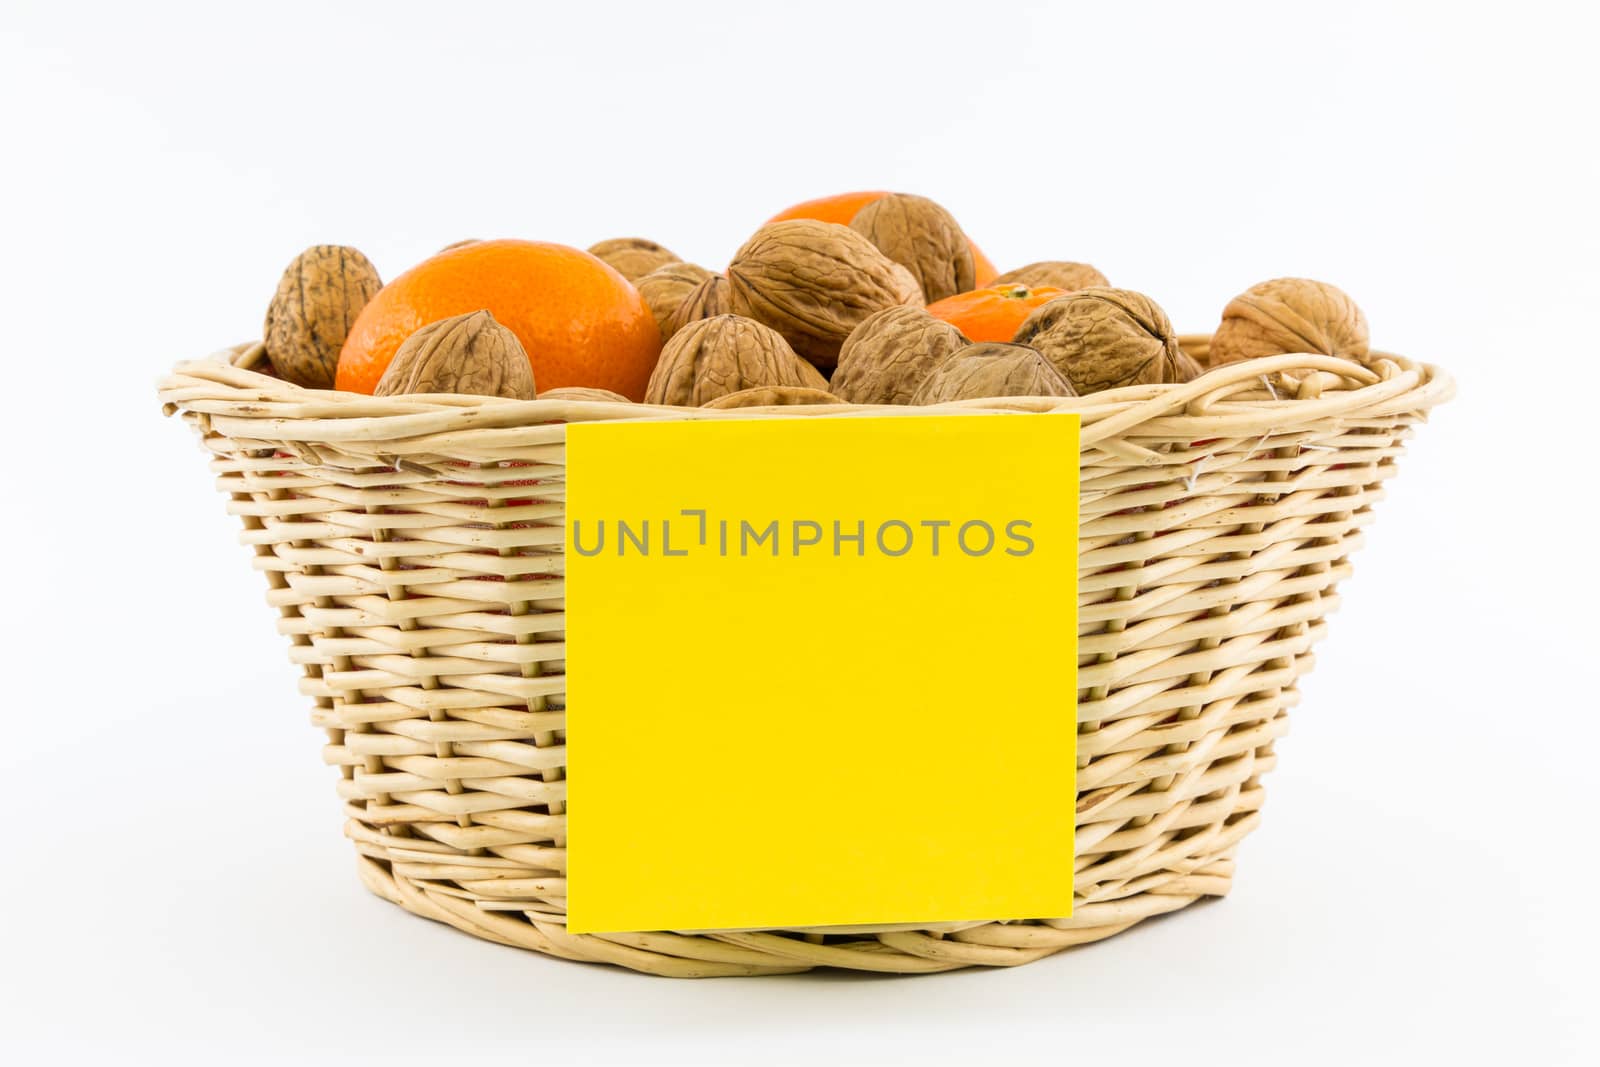 Small Basket with Walnuts, Tangerines and Yellow Note  by MarkDw